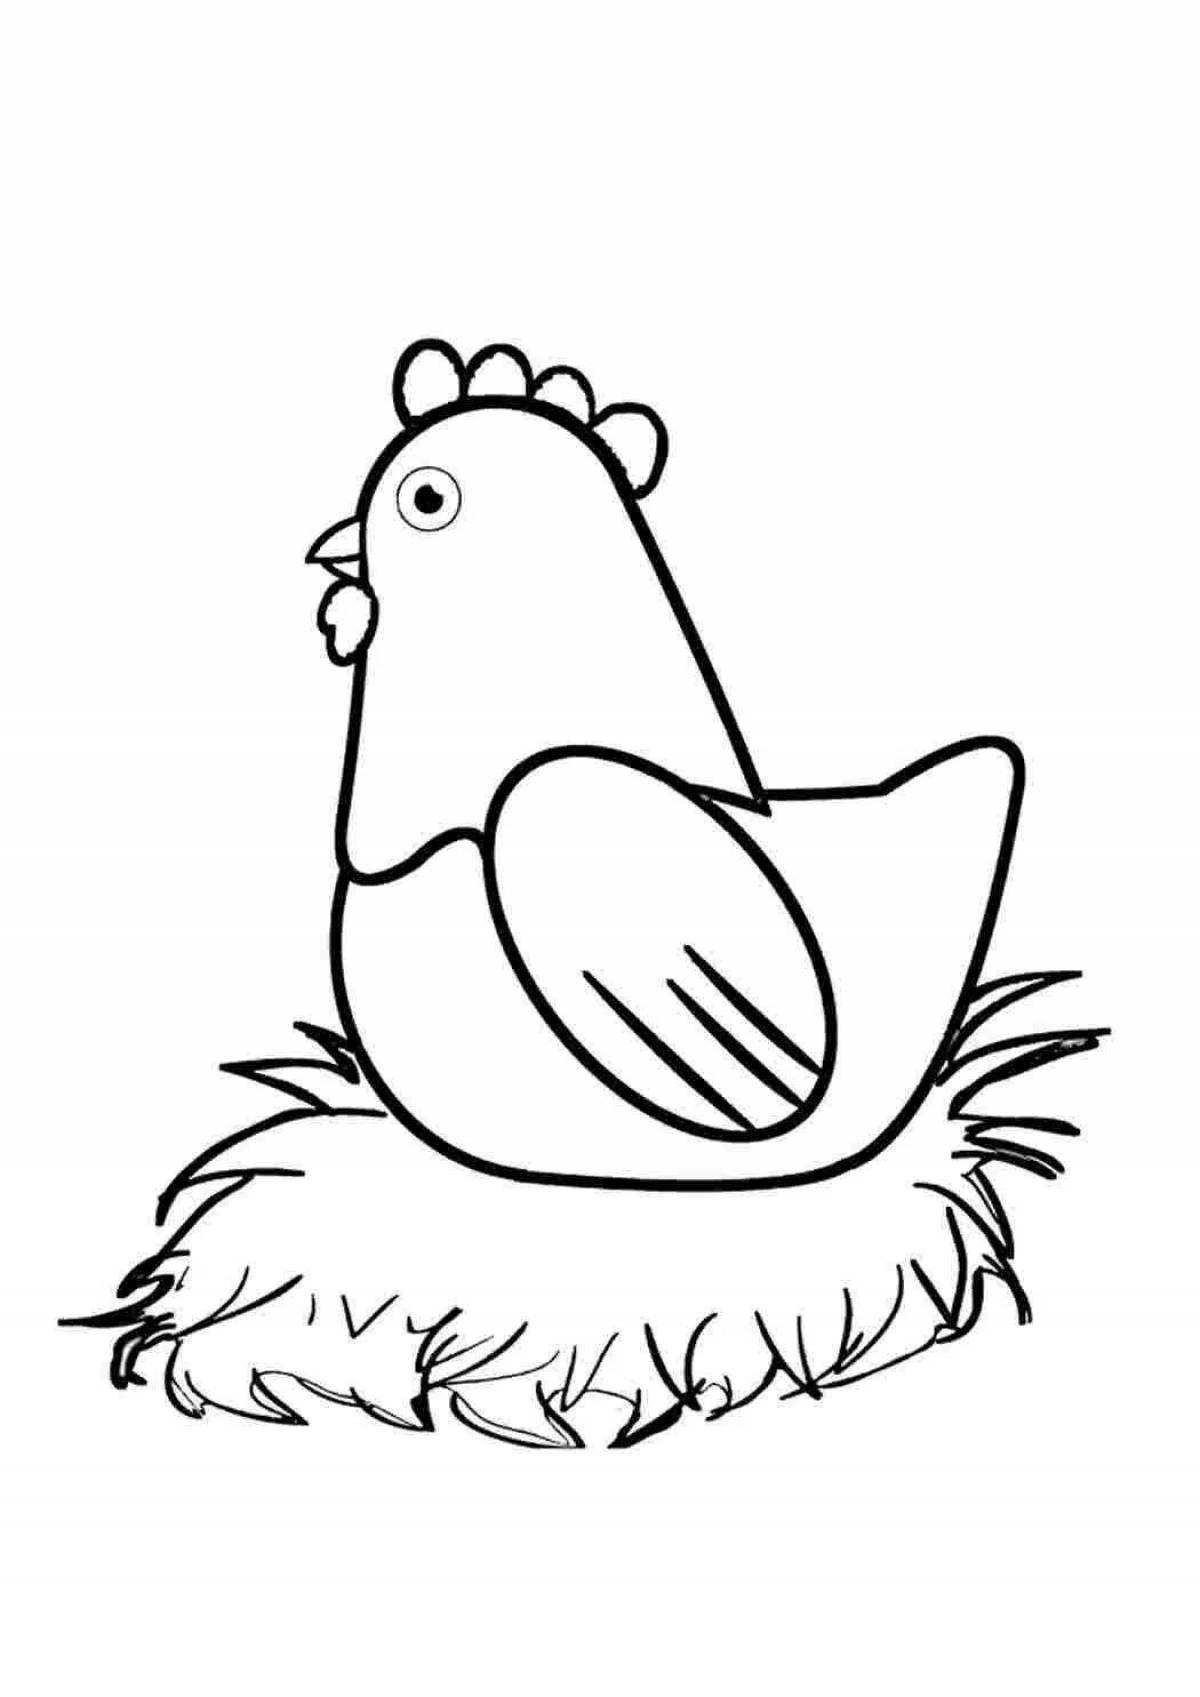 Rough Chicken coloring page for kids